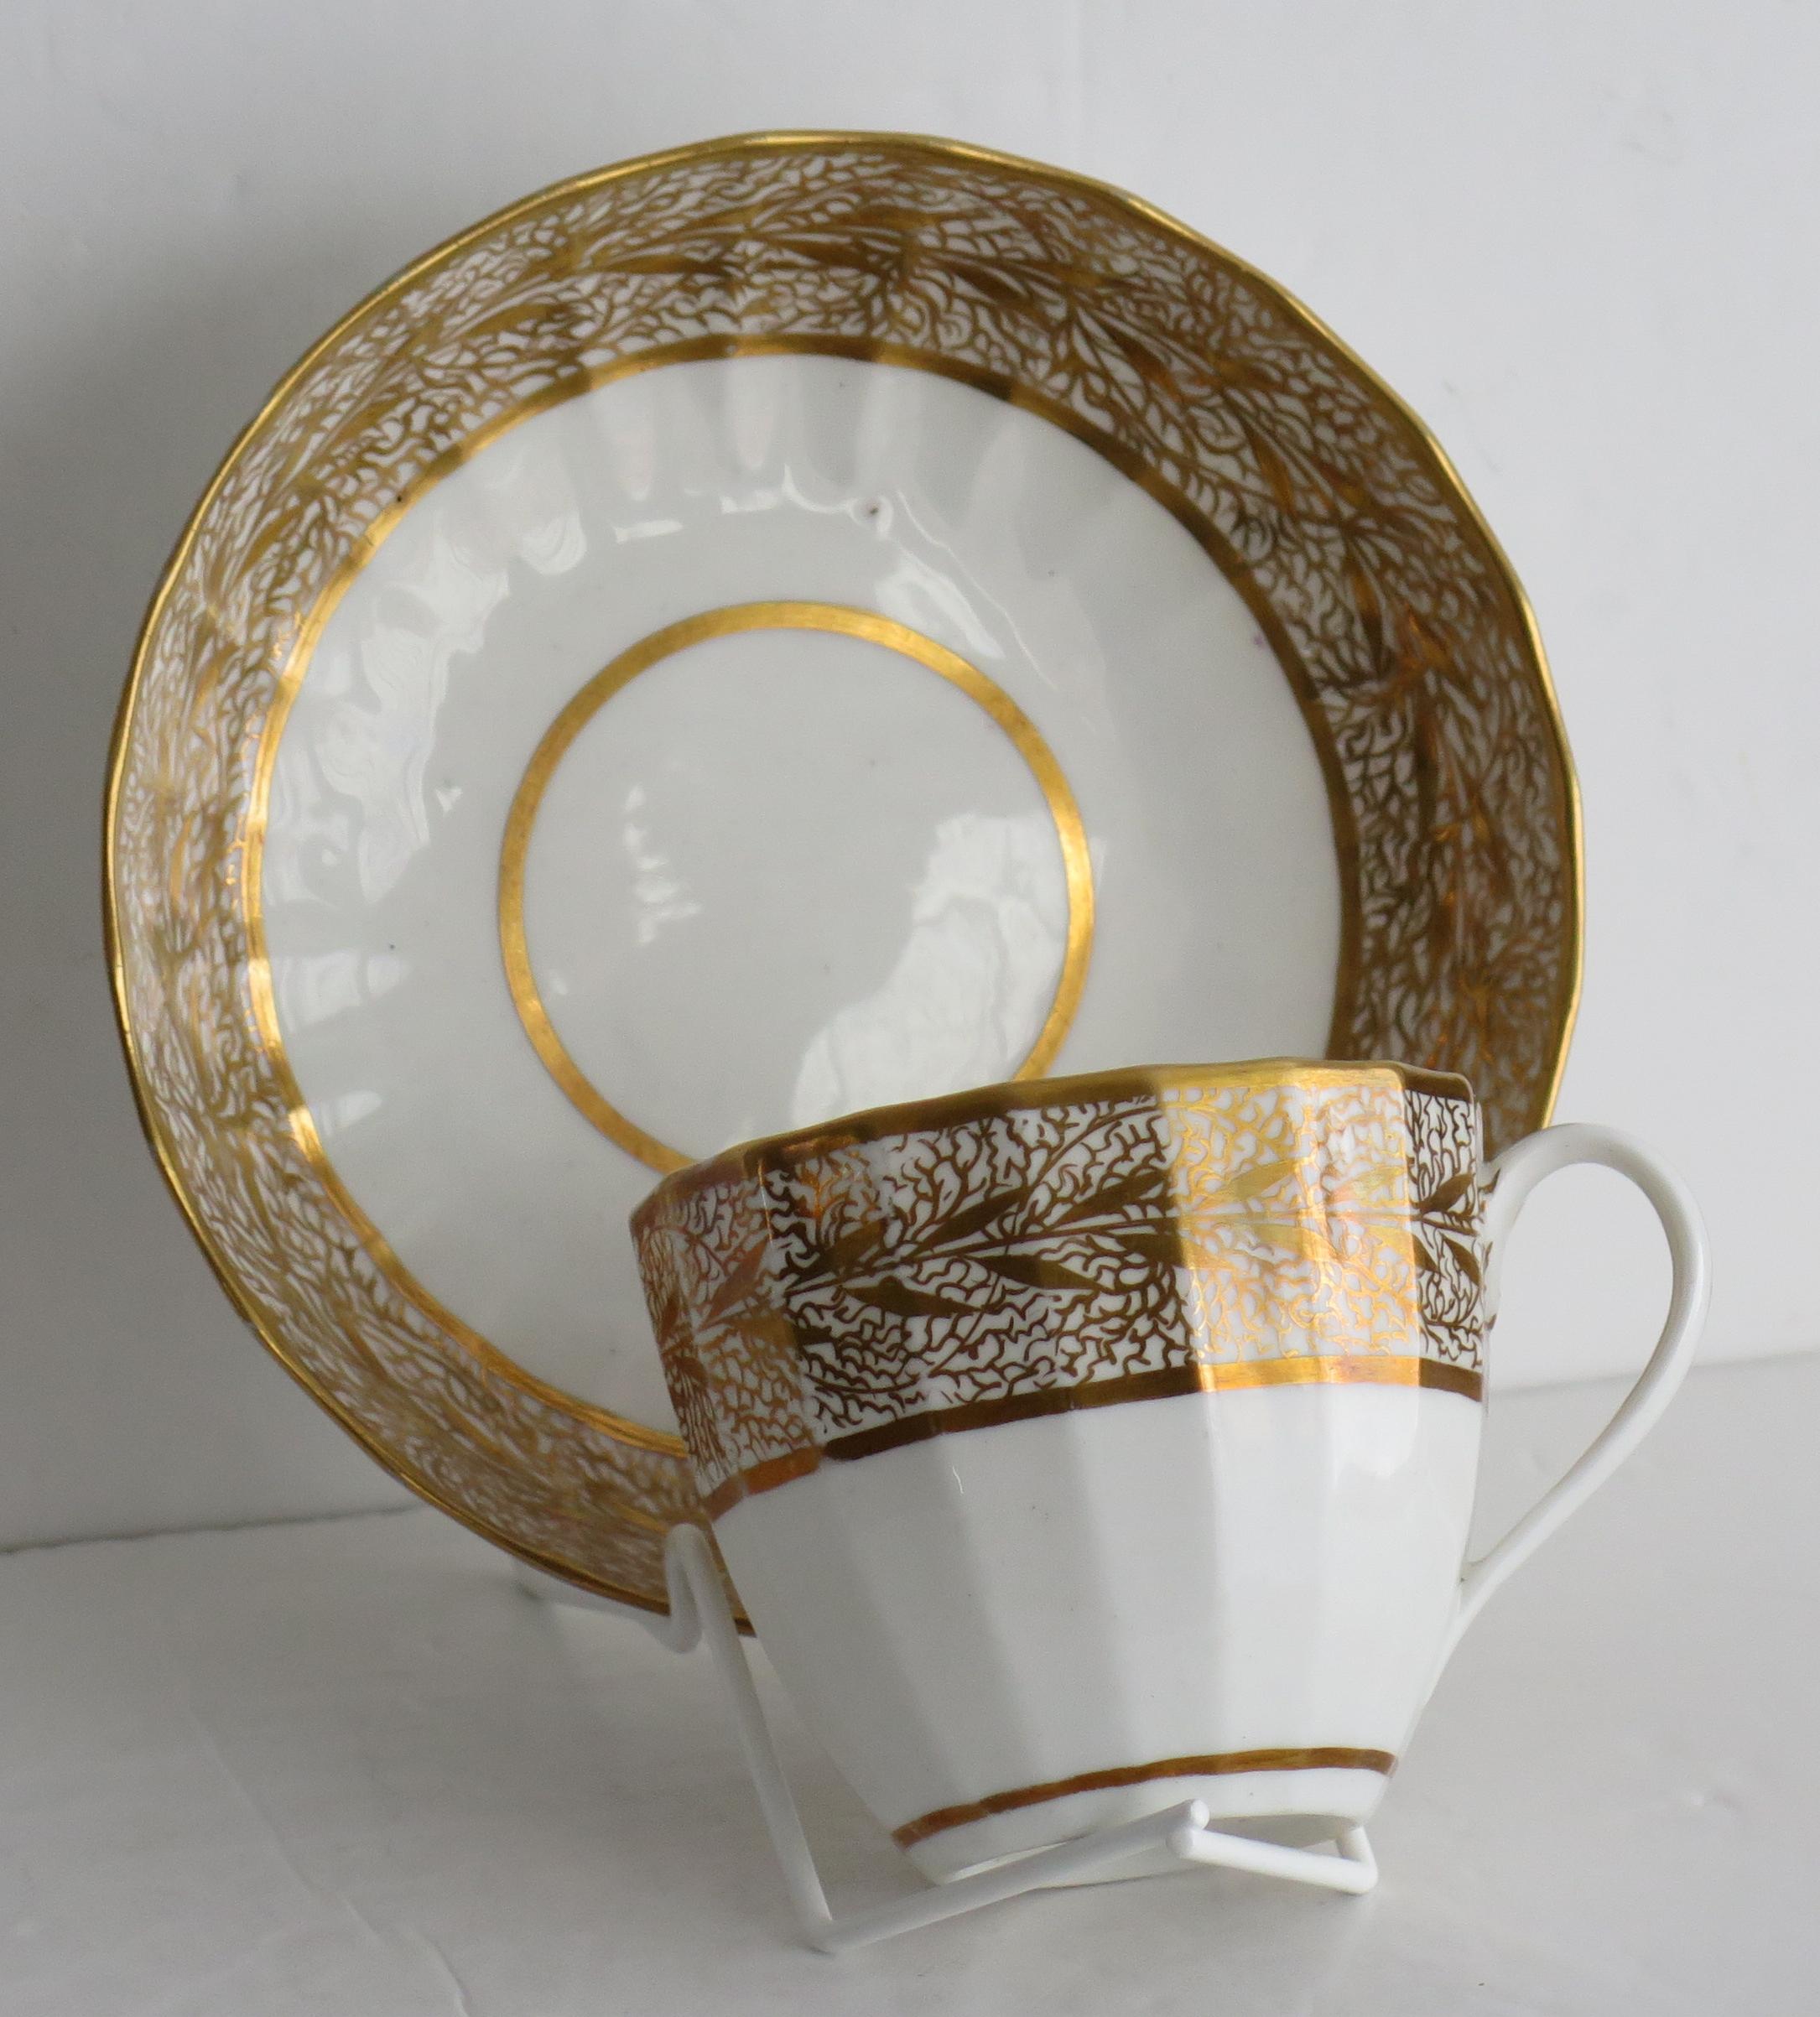 This is a good porcelain duo of a cup and saucer by the Derby factory, made during the George 111rd period, circa 1800.

Both pieces are well potted in the Hamilton flute shape with 18 vertical facets. 

The hand decoration is very well done, in